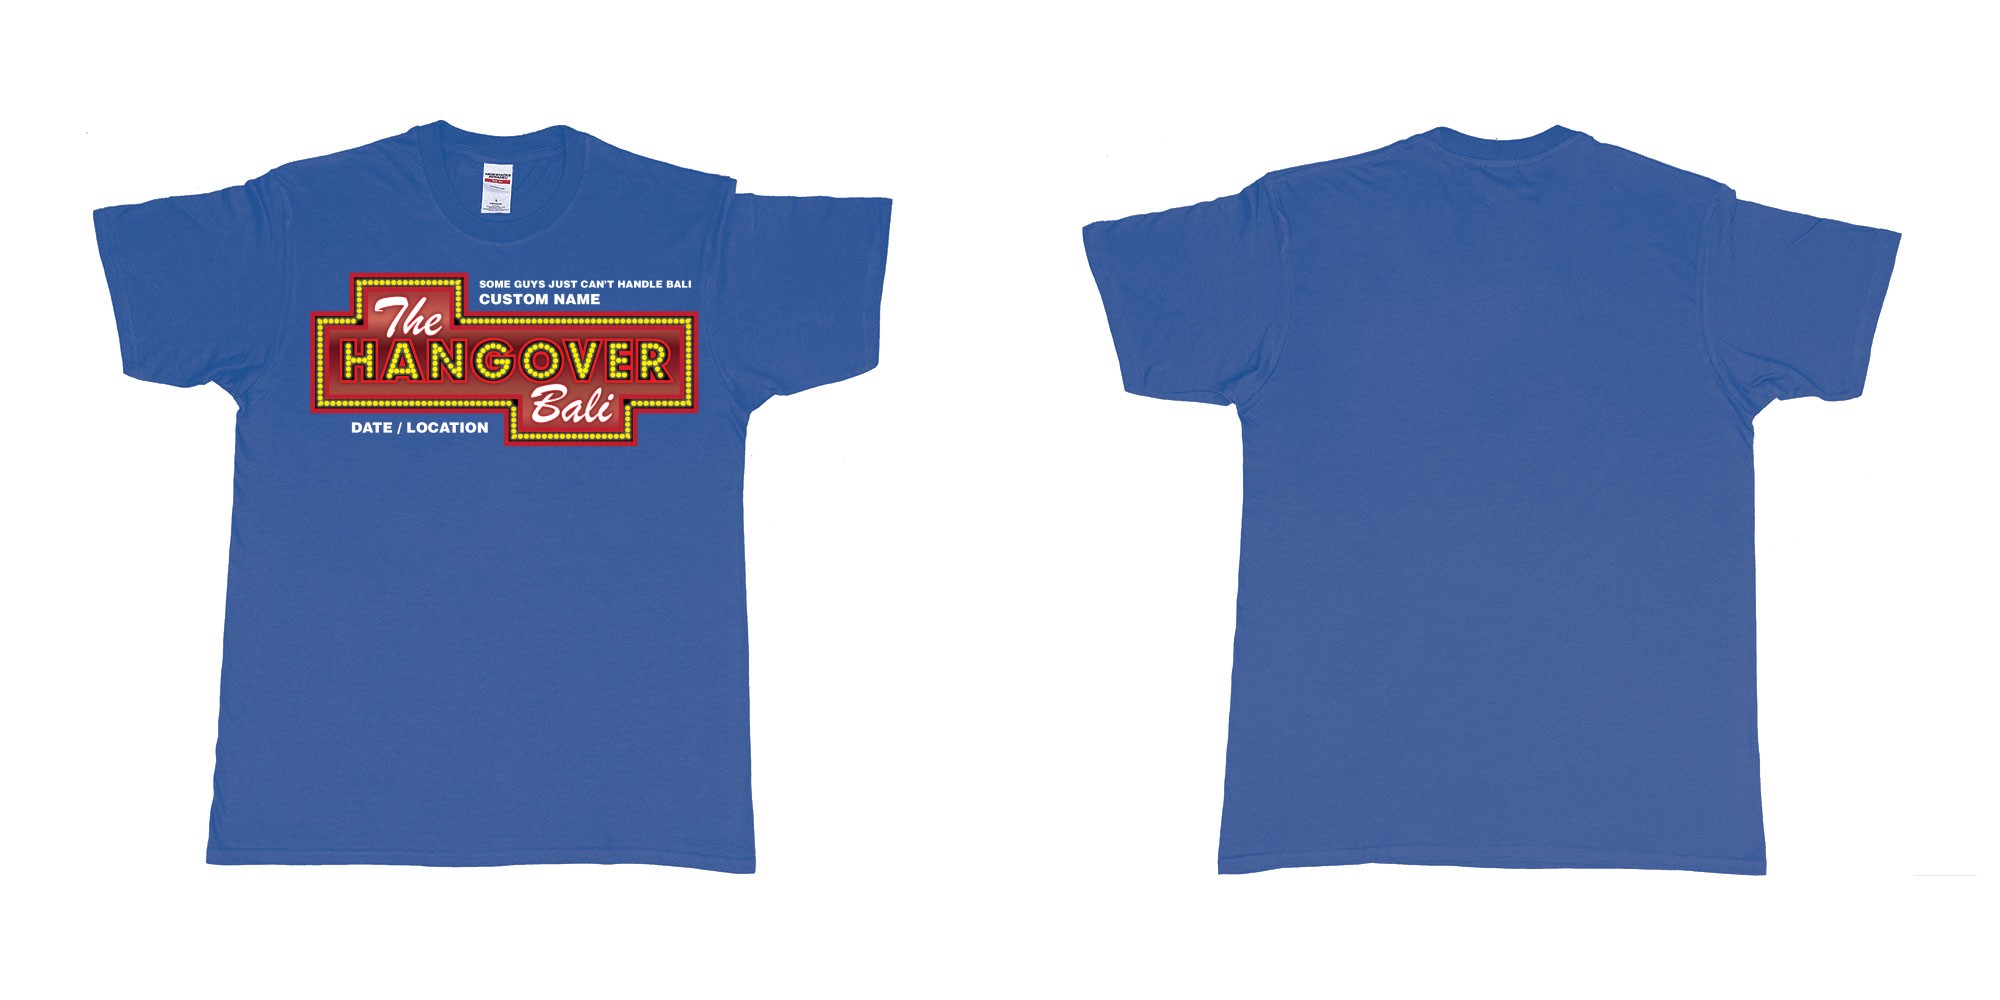 Custom tshirt design the hangover bali tour custom printing own name in fabric color royal-blue choice your own text made in Bali by The Pirate Way